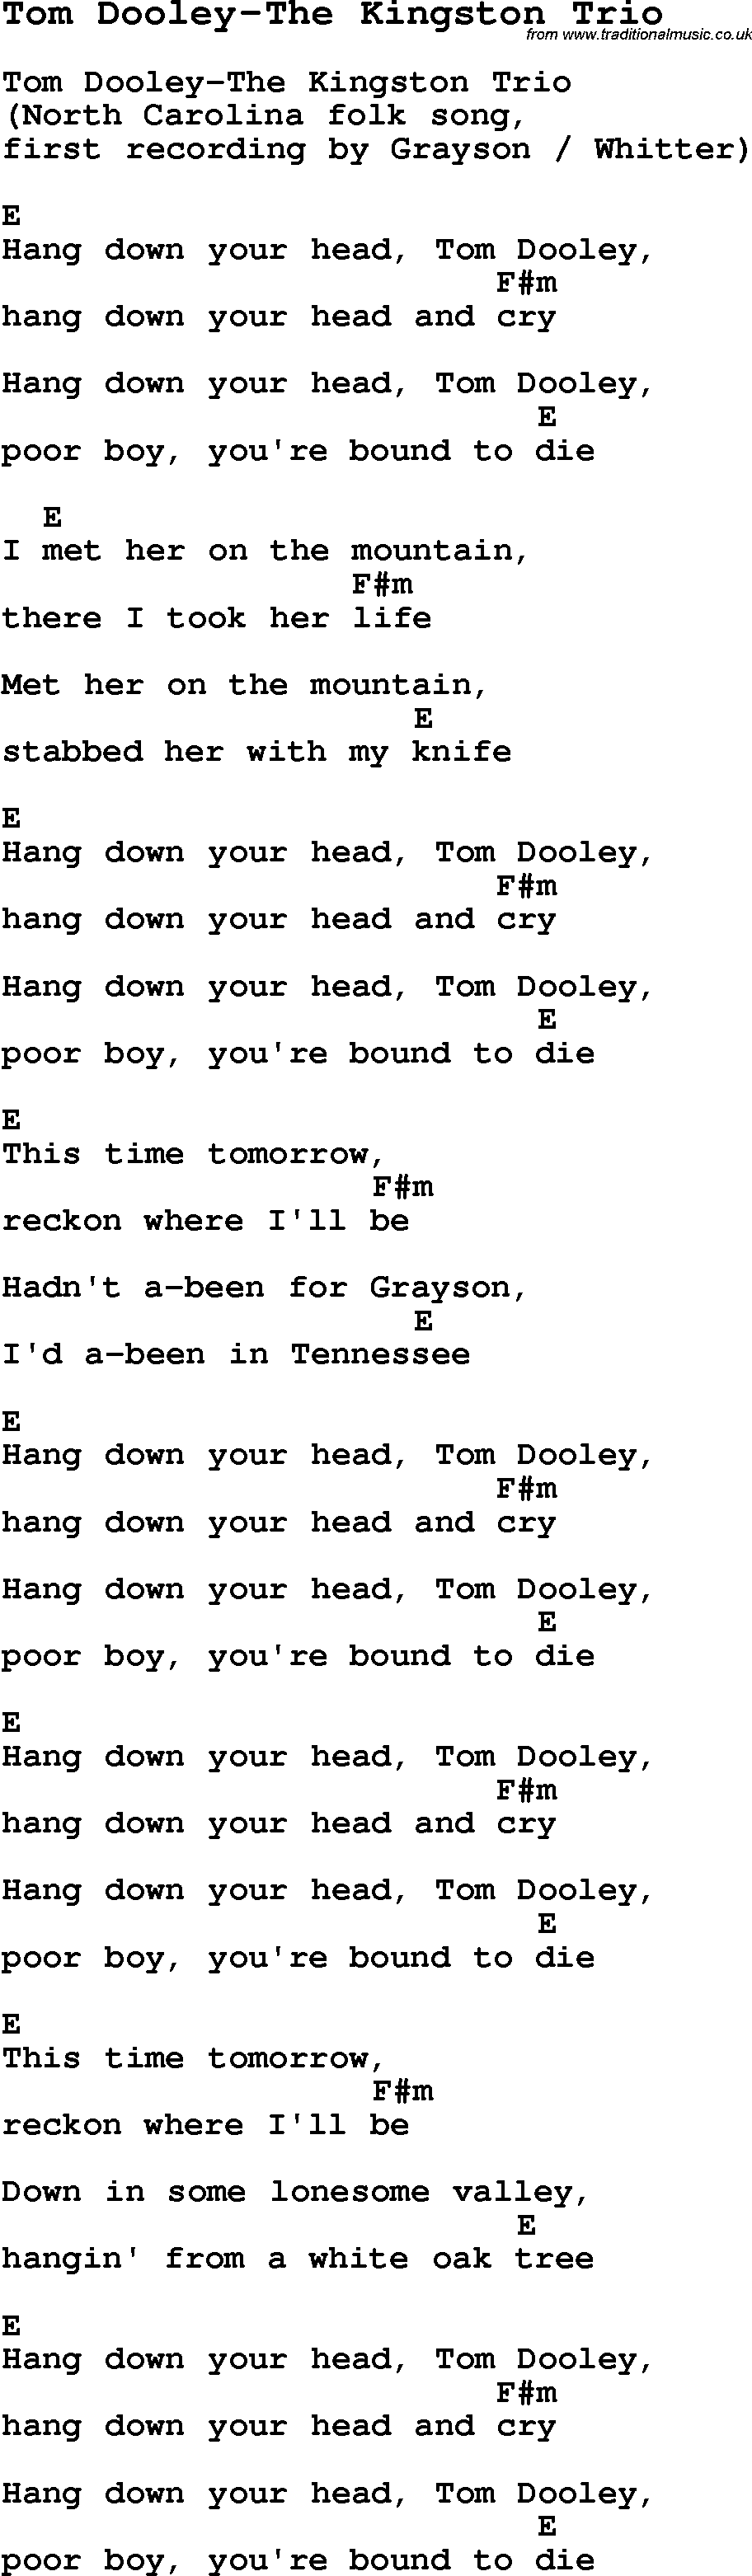 summer-camp-song-tom-dooley-the-kingston-trio-with-lyrics-and-chords